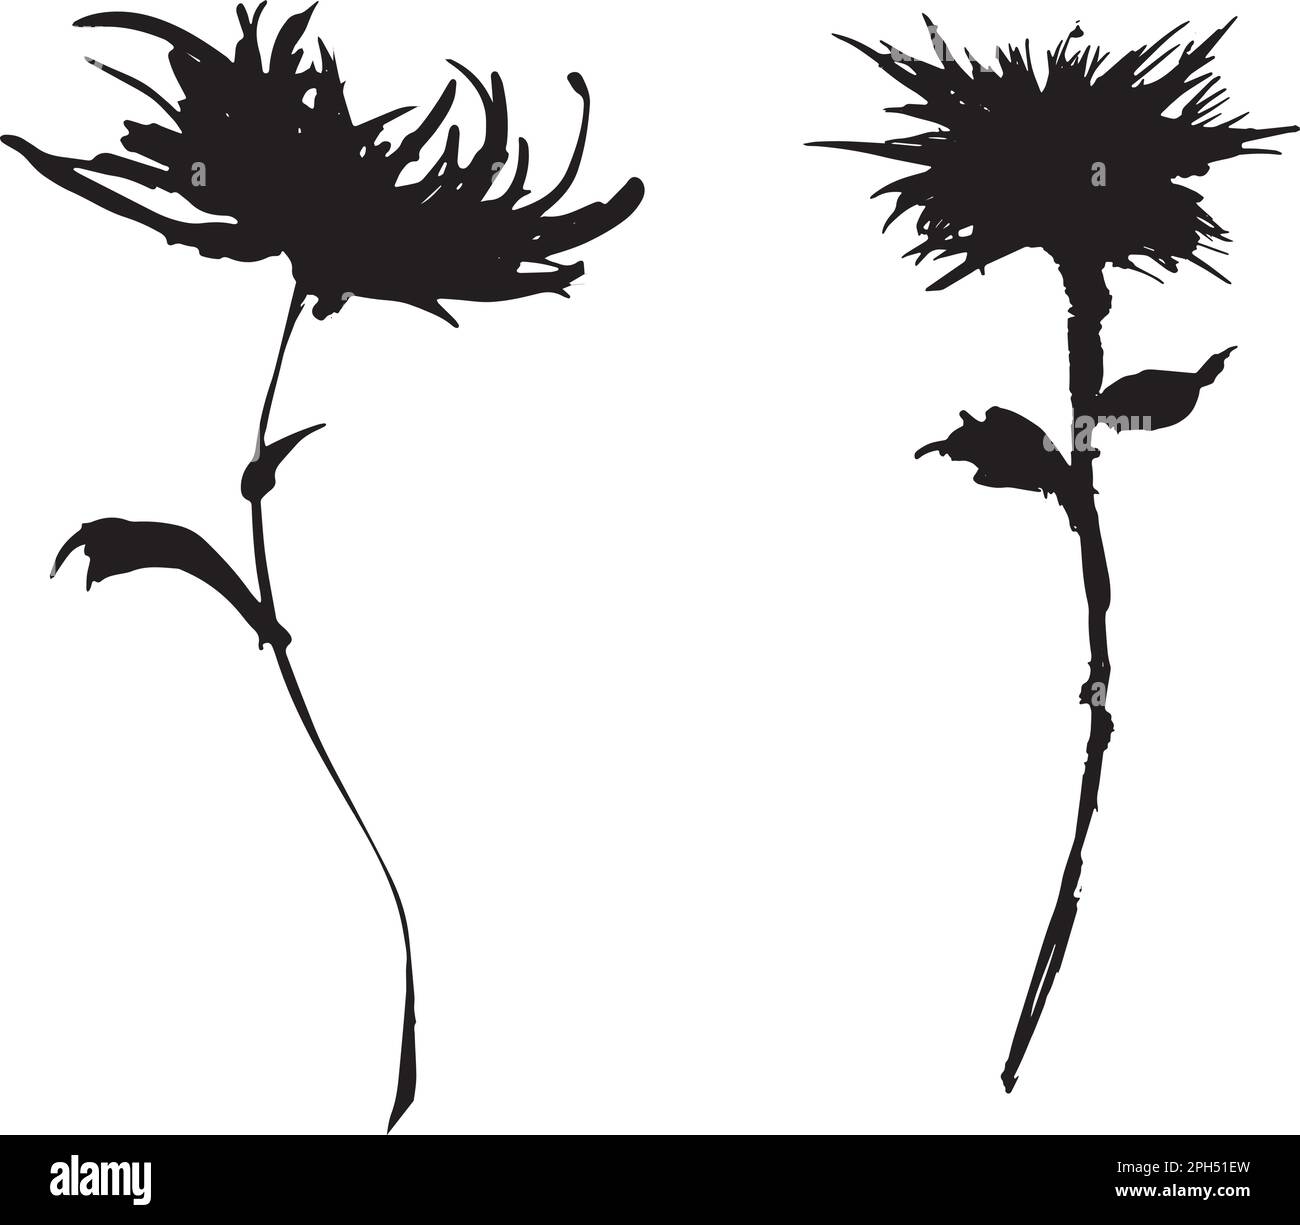 Chrysanthemum hand drawn black paint vector set. Ink drawing flowers and leaves. Stock Vector